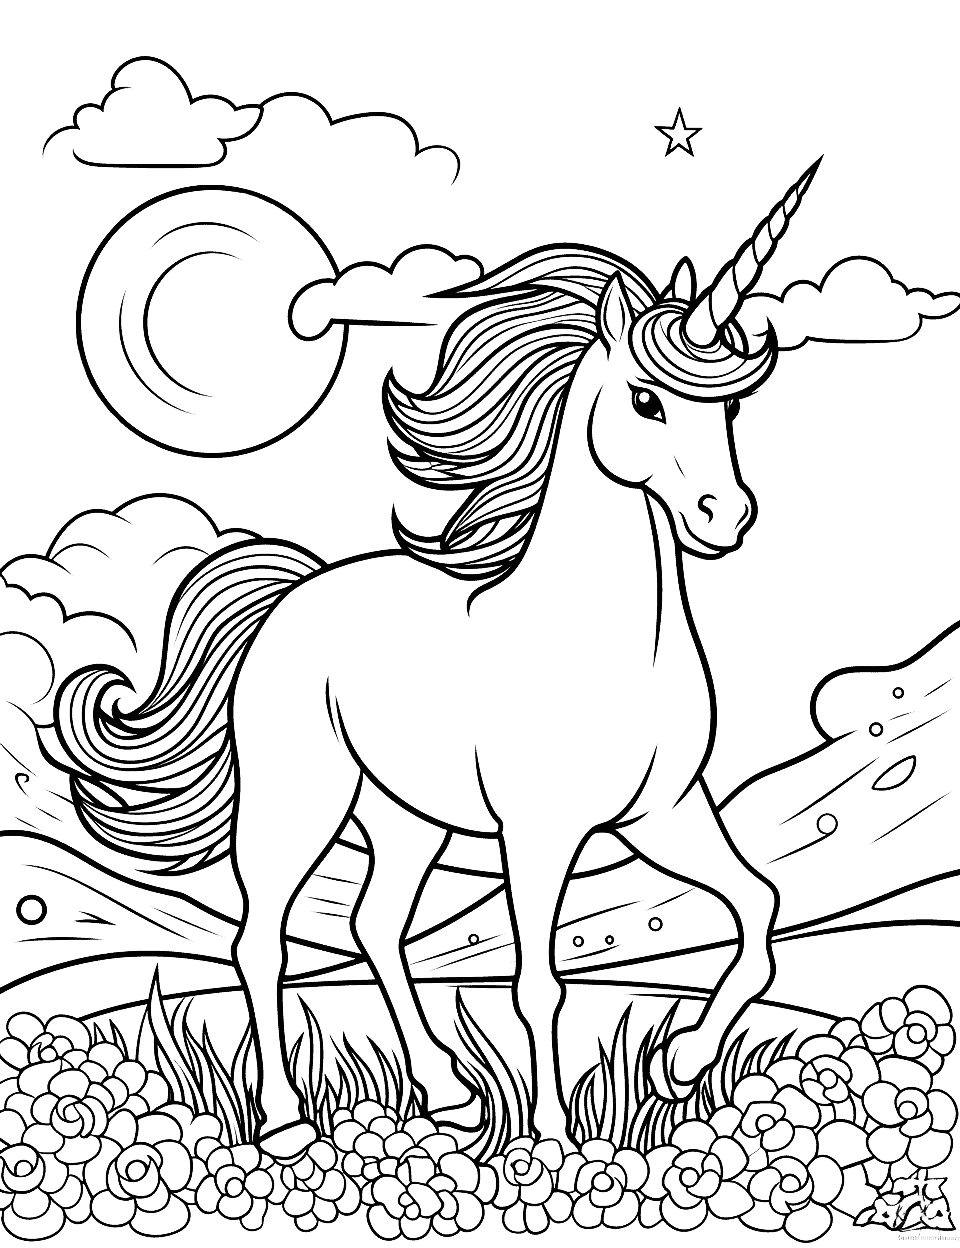 Sunset Unicorn Coloring Page - A tranquil scene of a unicorn against the backdrop of a beautiful sunset.